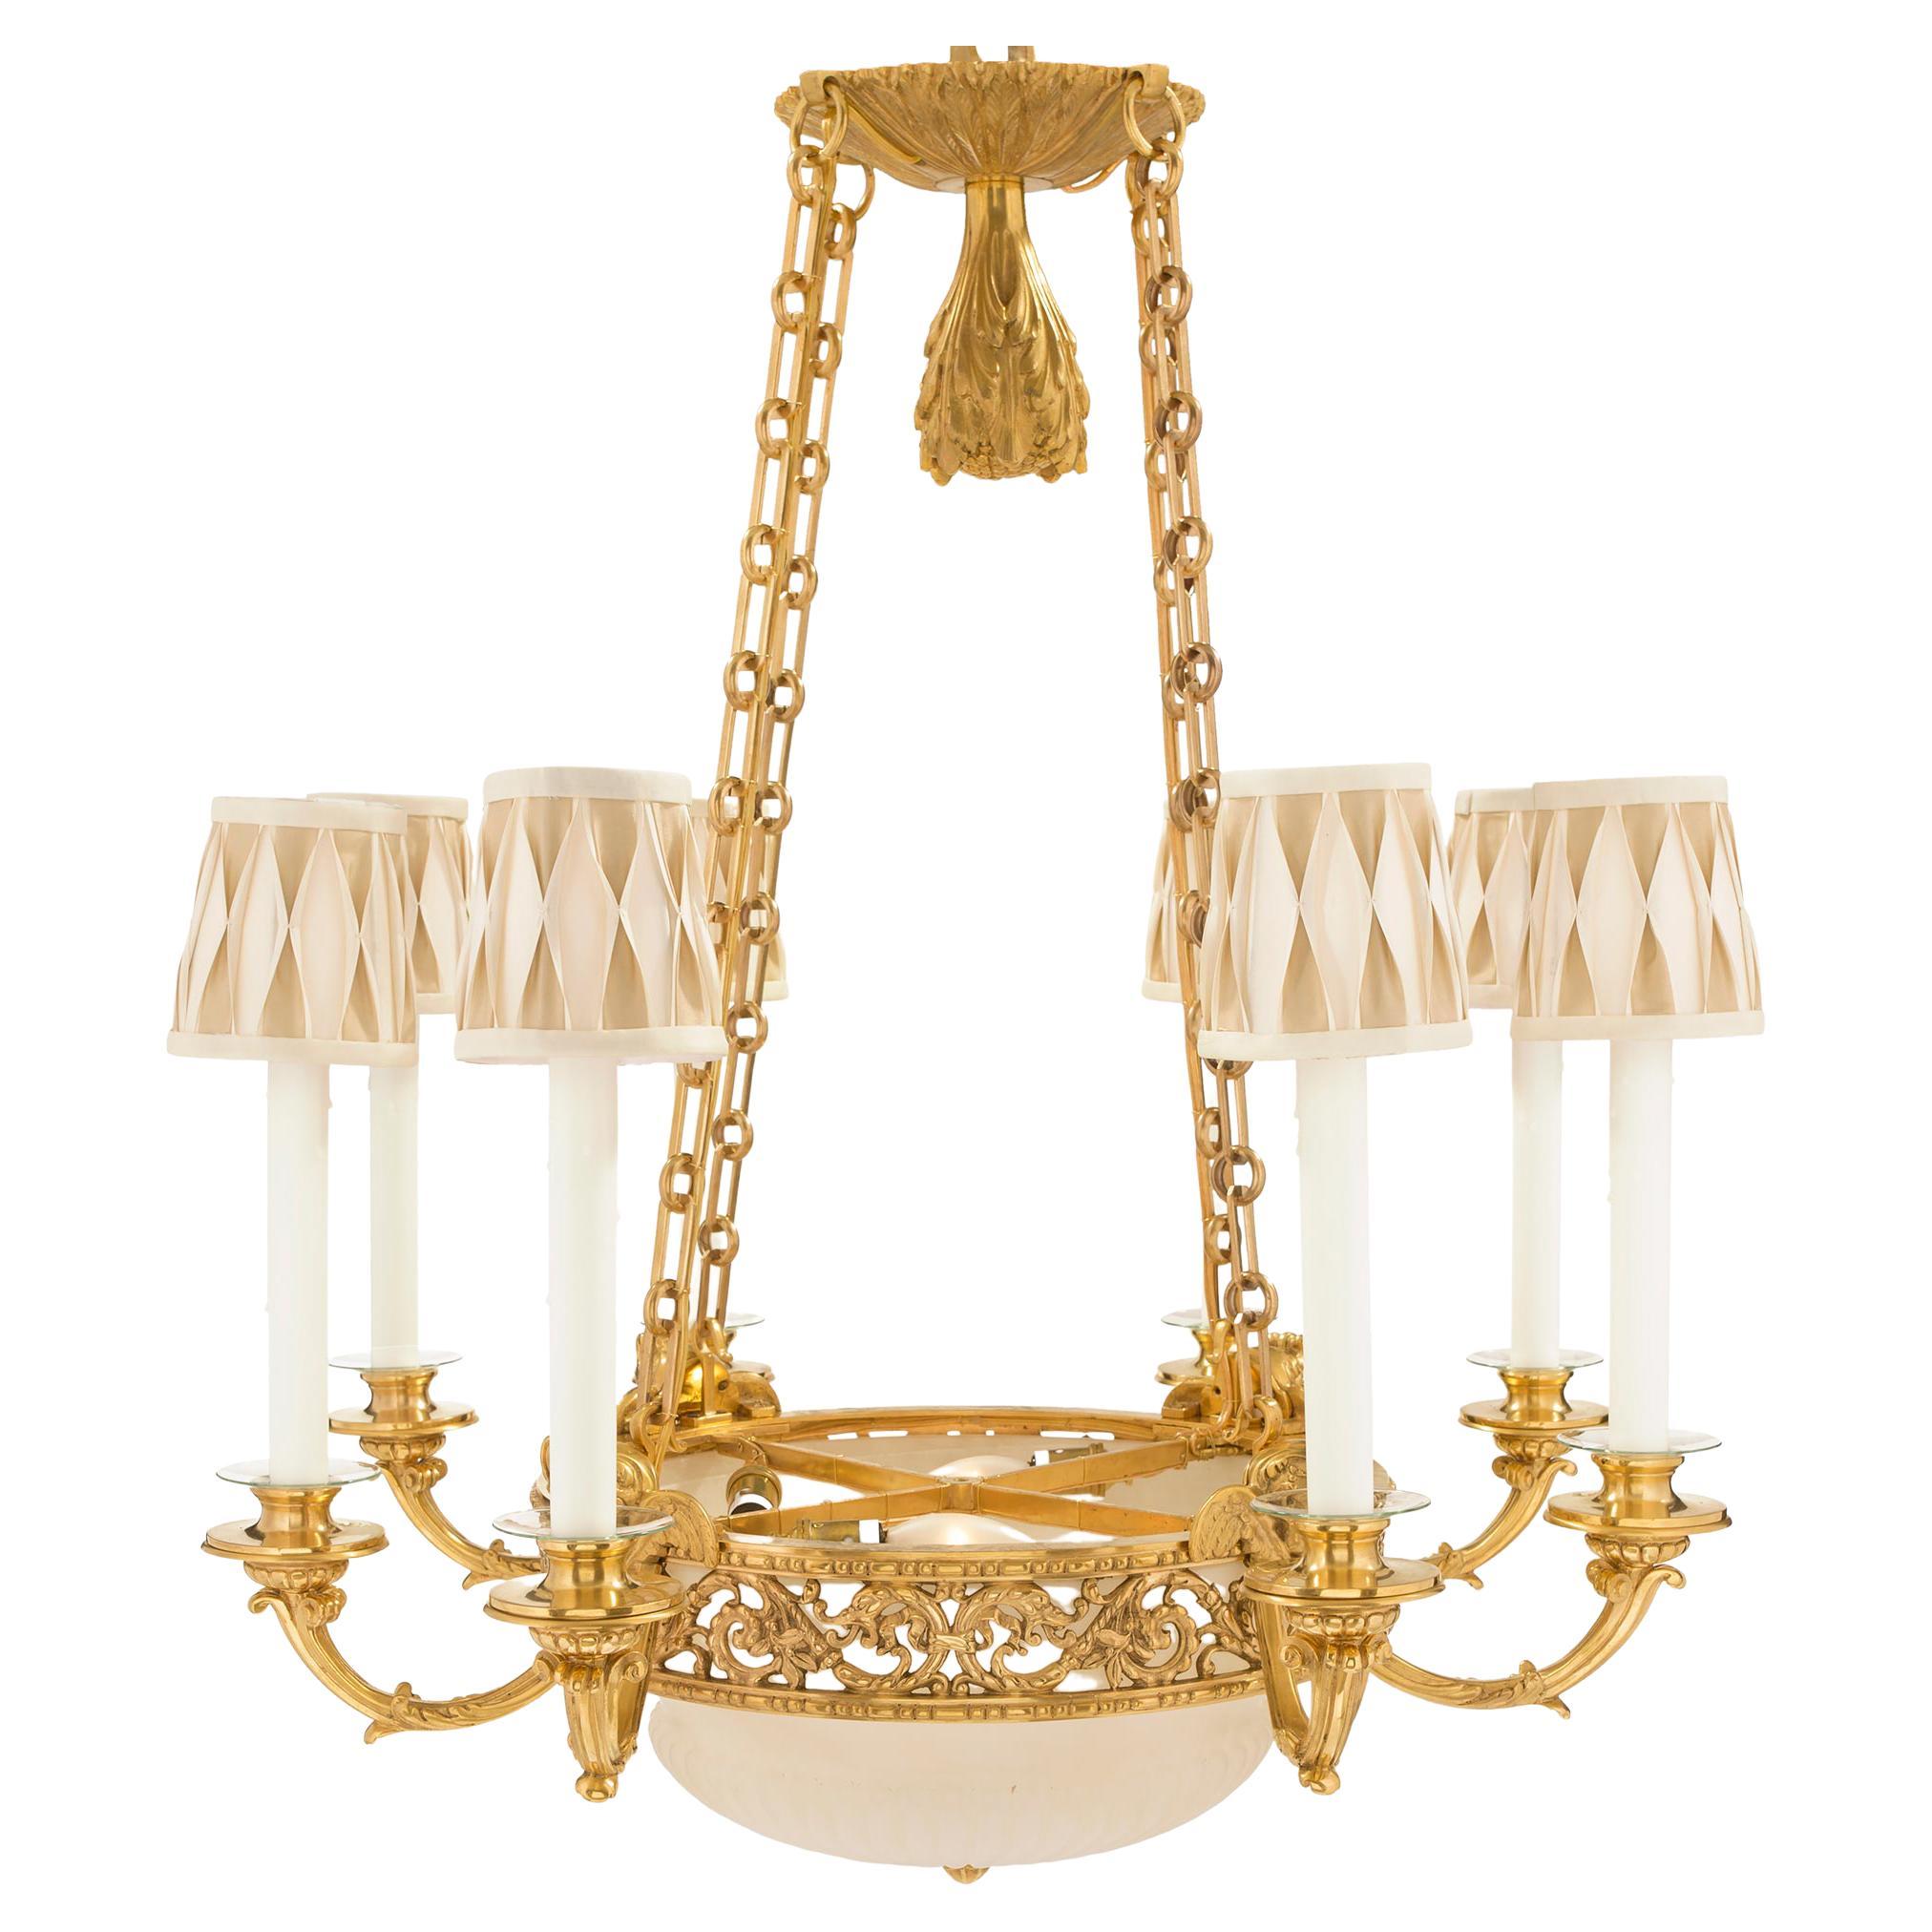 French 19th Century Louis XVI Style Ormolu and Alabaster Twelve-Light Chandelier For Sale